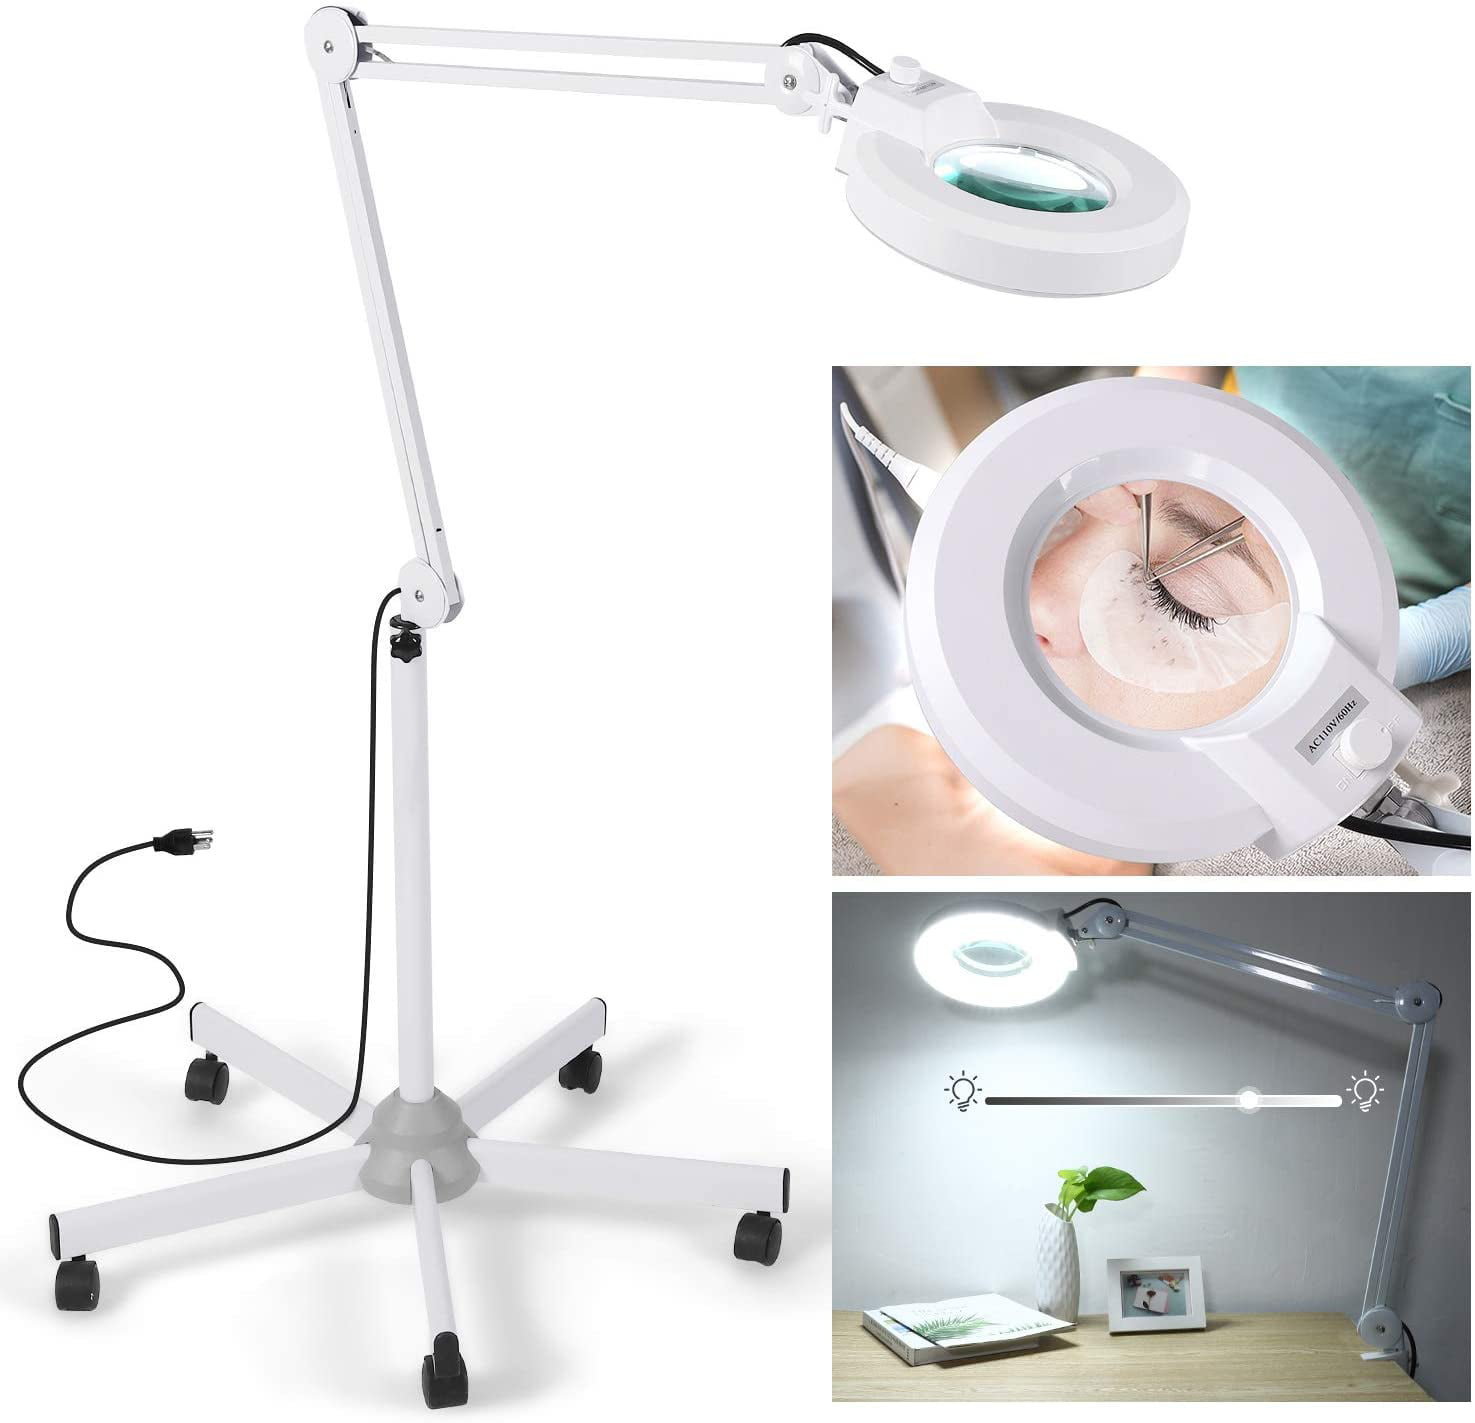 Adjustable Swivel Arm 8x Magnifier Lamp Light For Skincare Beauty Manicure Tattoo Salon Spa With Rolling Floor Stand magnifier for readi Creative craft magnifying glass Floor Standing Magnifying Lamp 